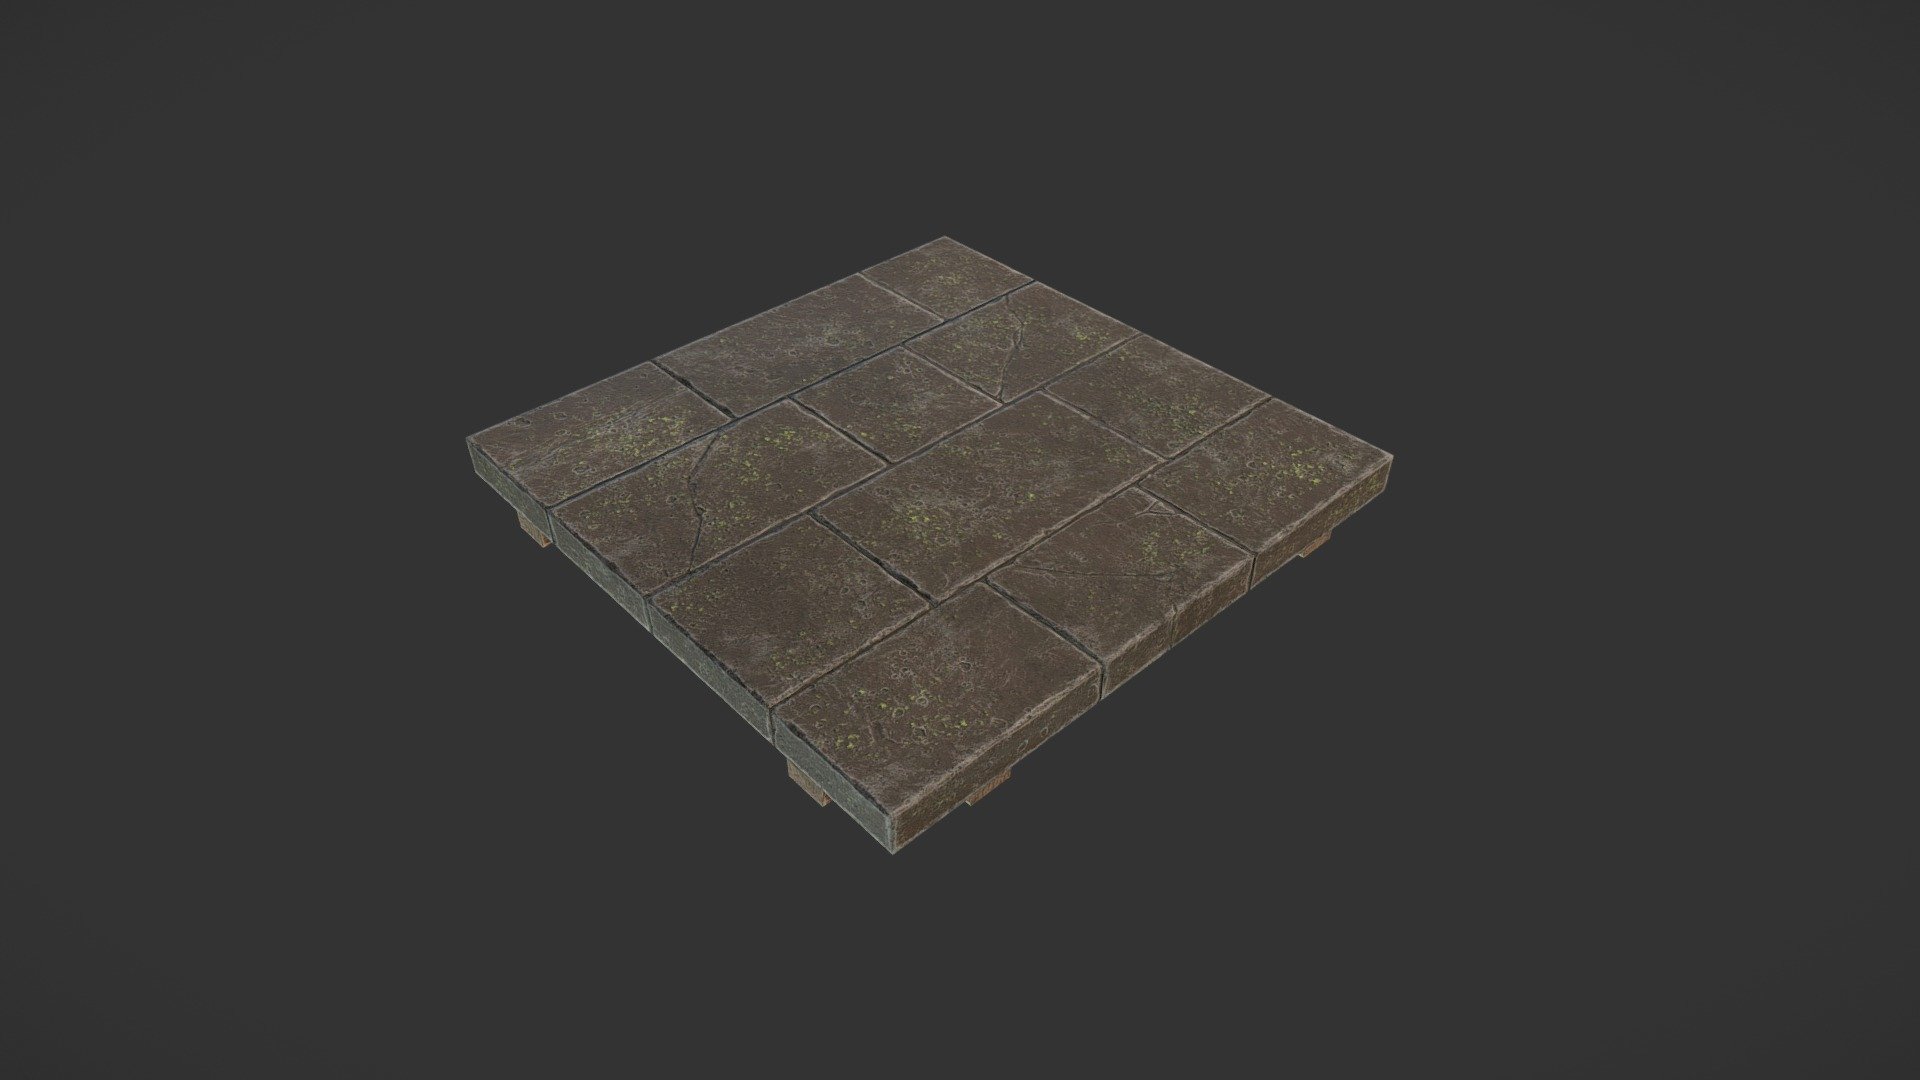 This is a new props for Unity3D package “Dungeon”. PBR material 3d model